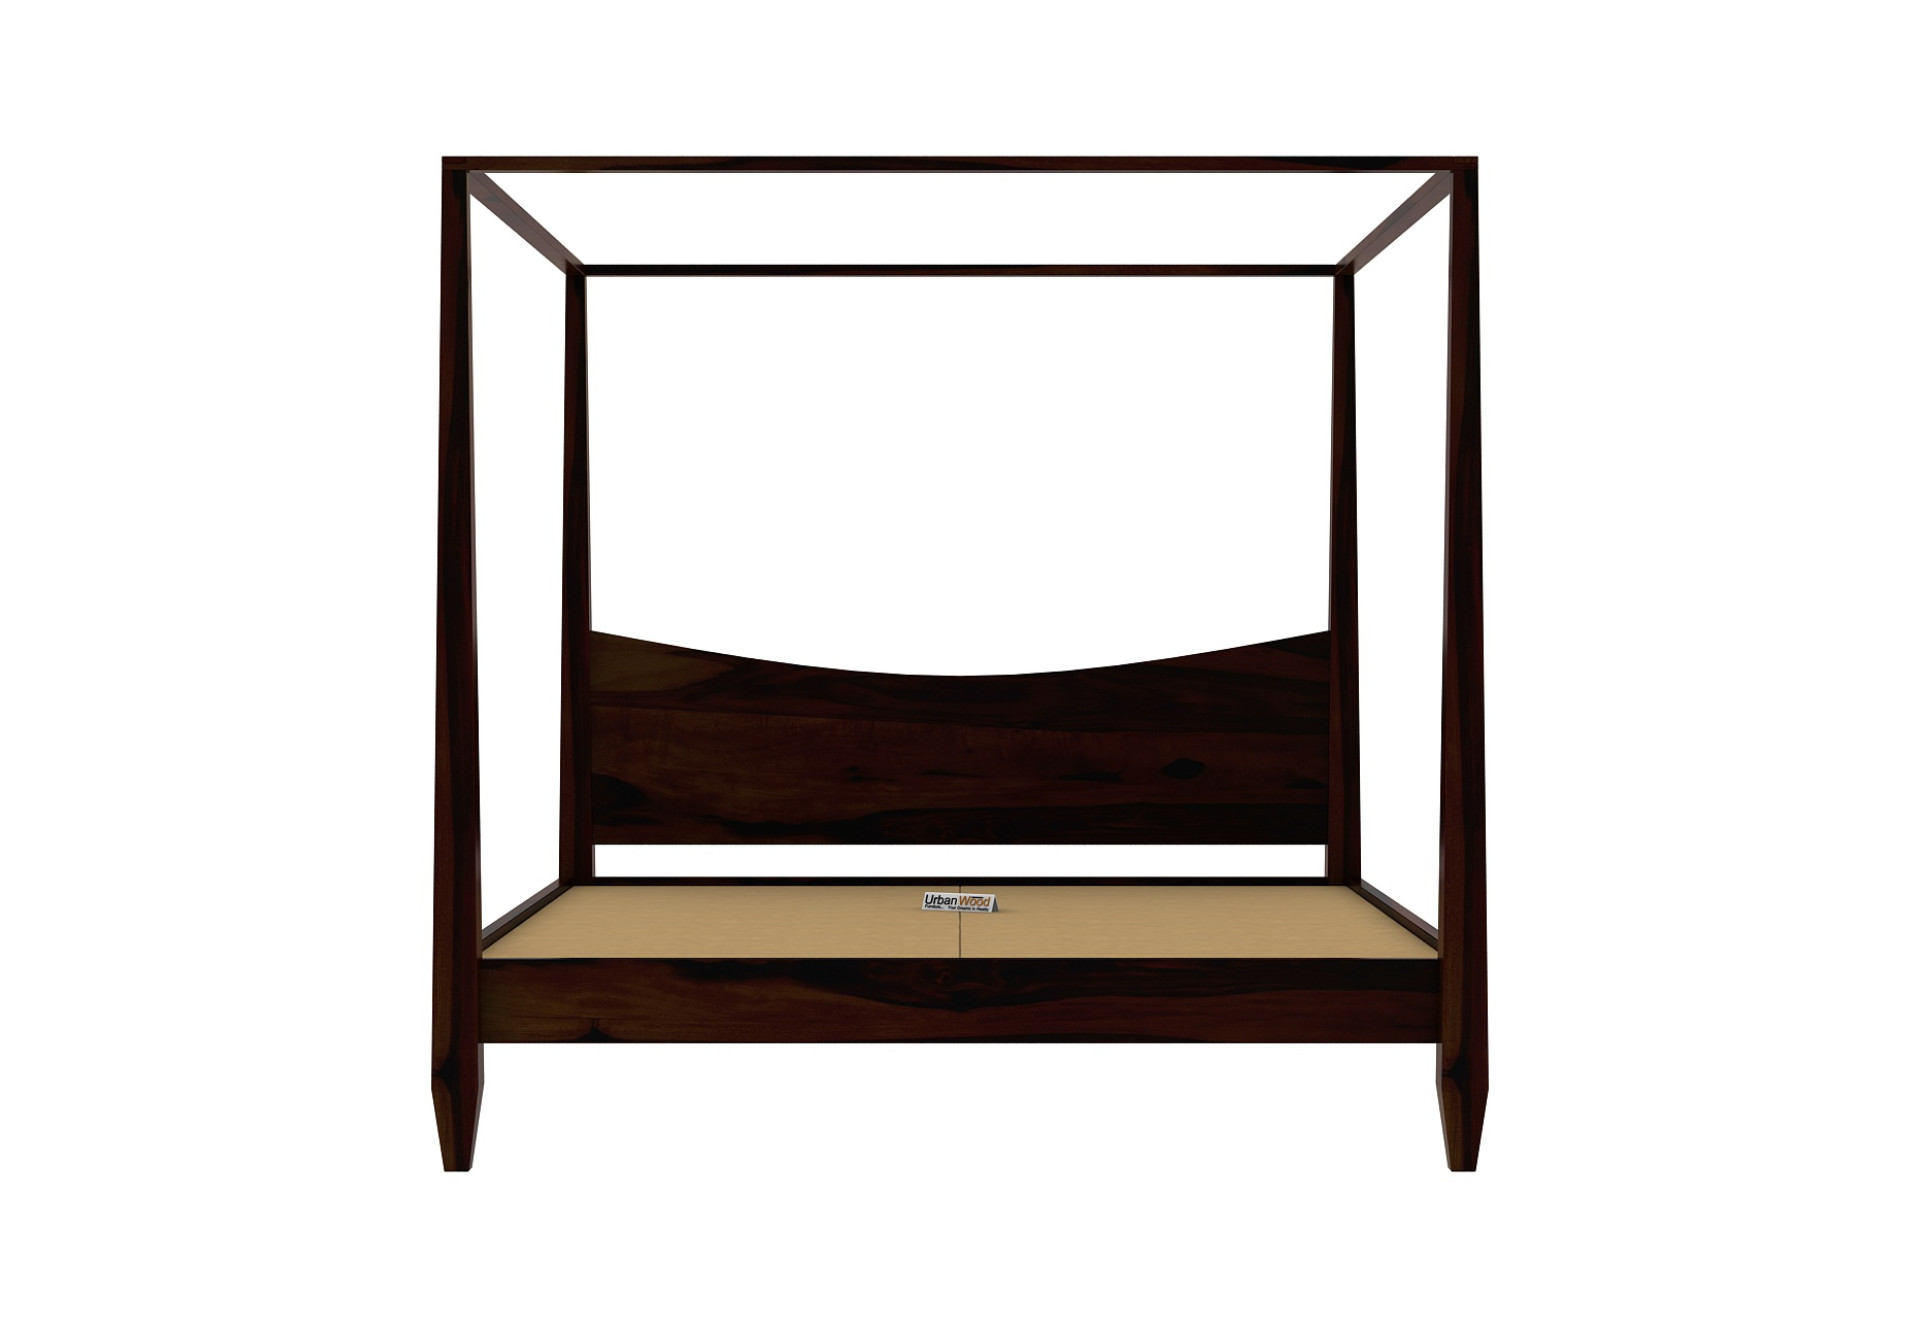 Flora Poster Bed (Queen Size, Walnut Finish)